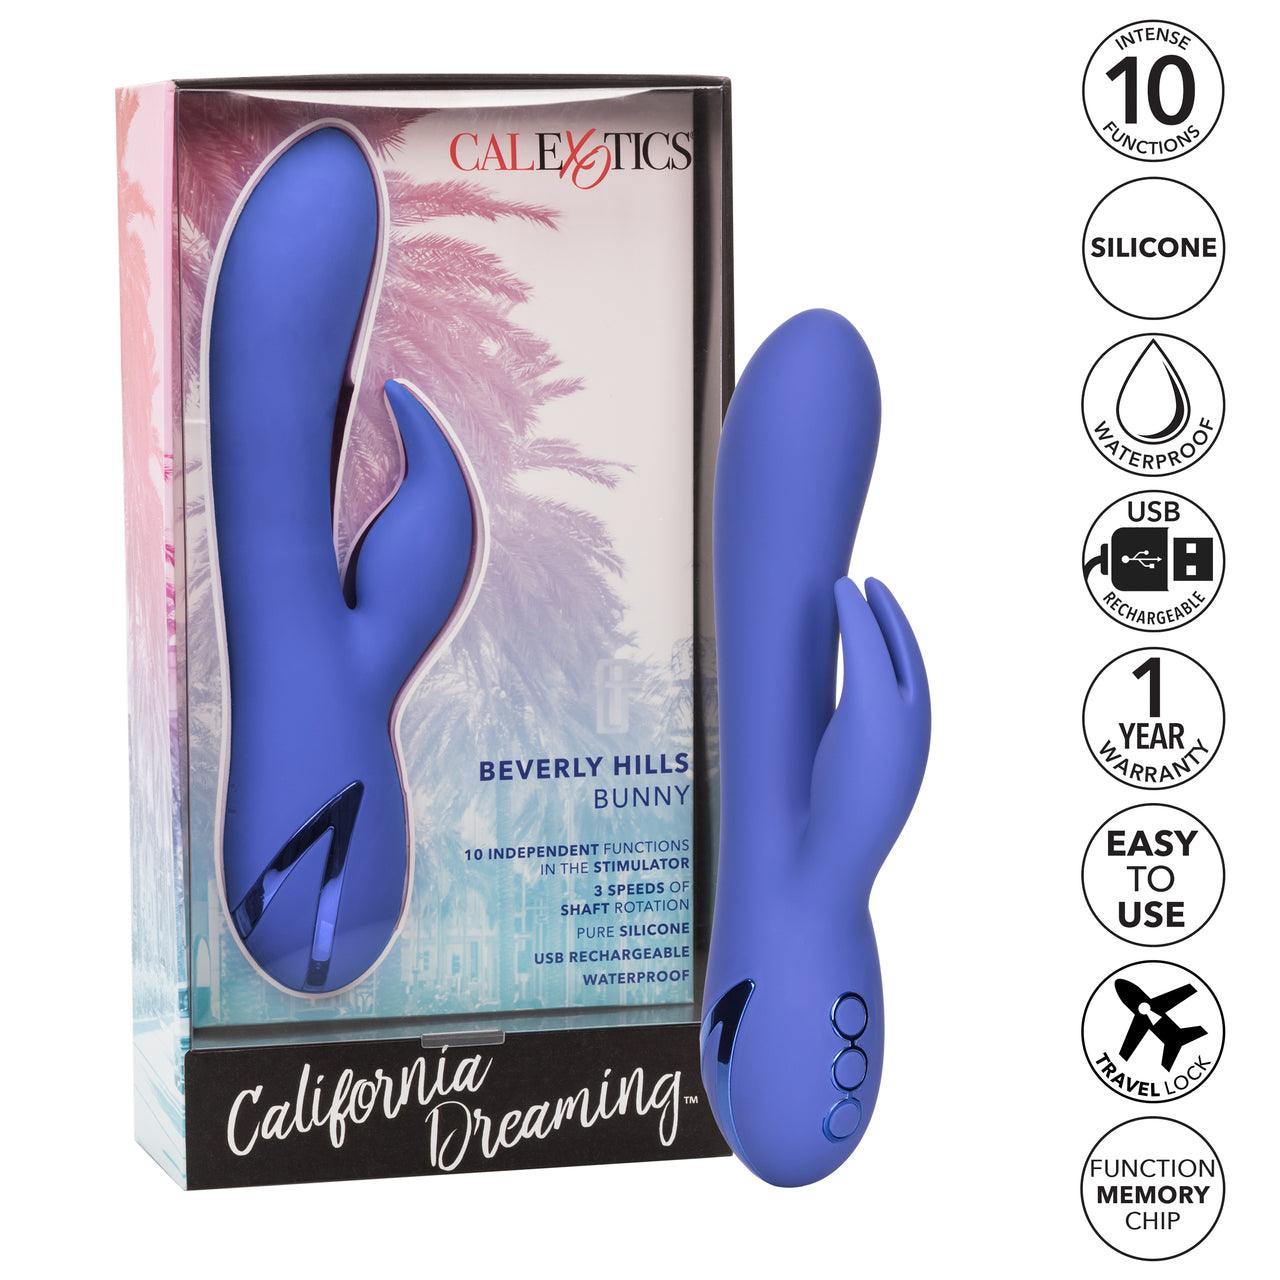 Calexotics California Dreaming Beverly Hills Bunny - Buy At Luxury Toy X - Free 3-Day Shipping